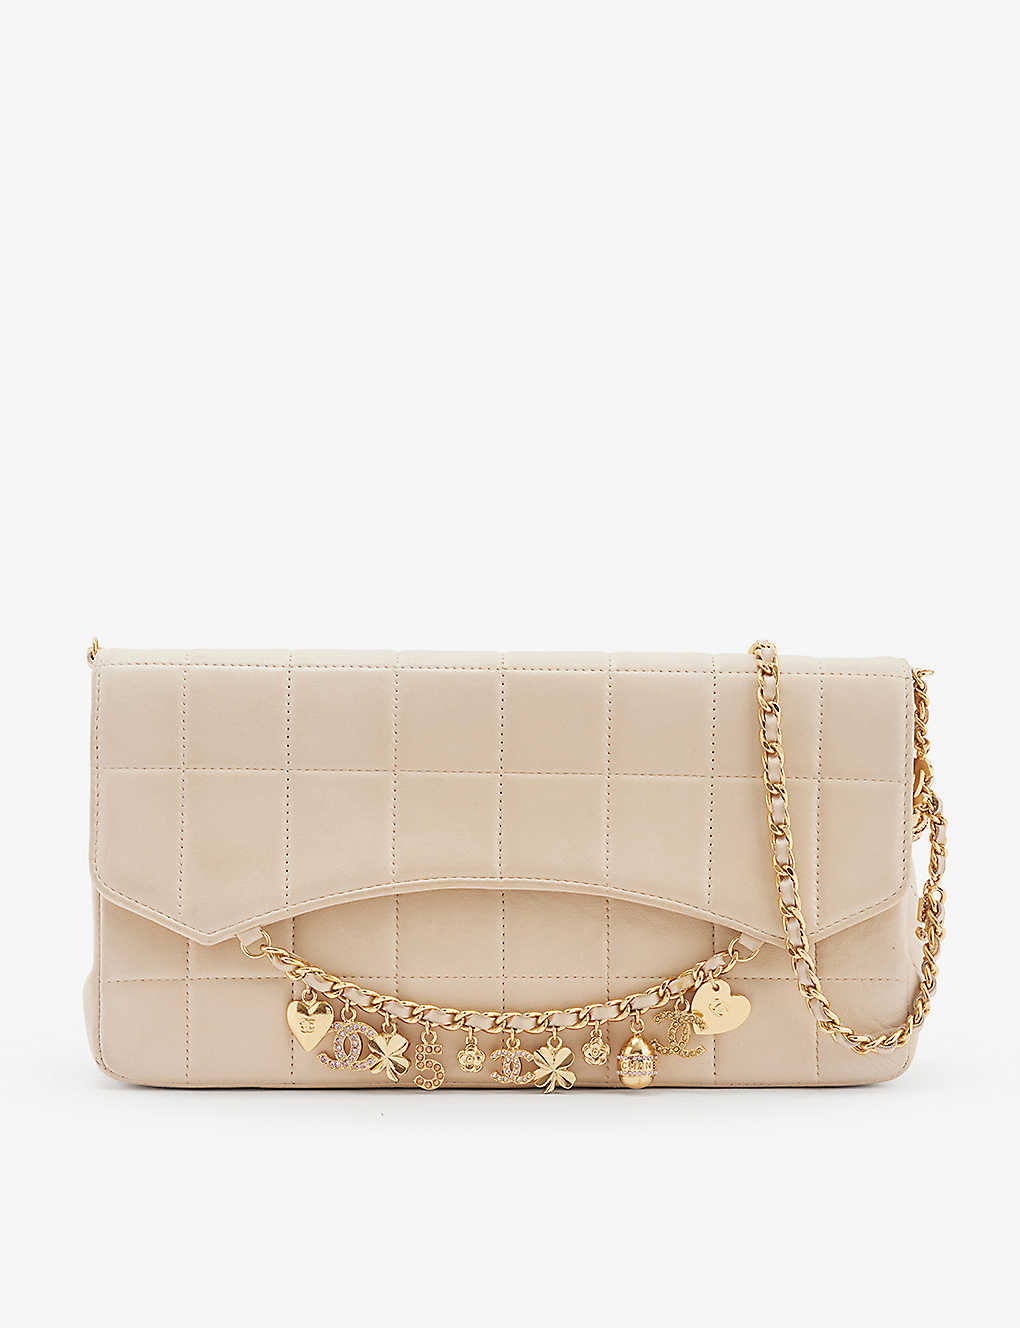 Chanel Beige Chocolate Bar Leather Lucky Charms Chain Bag Chanel